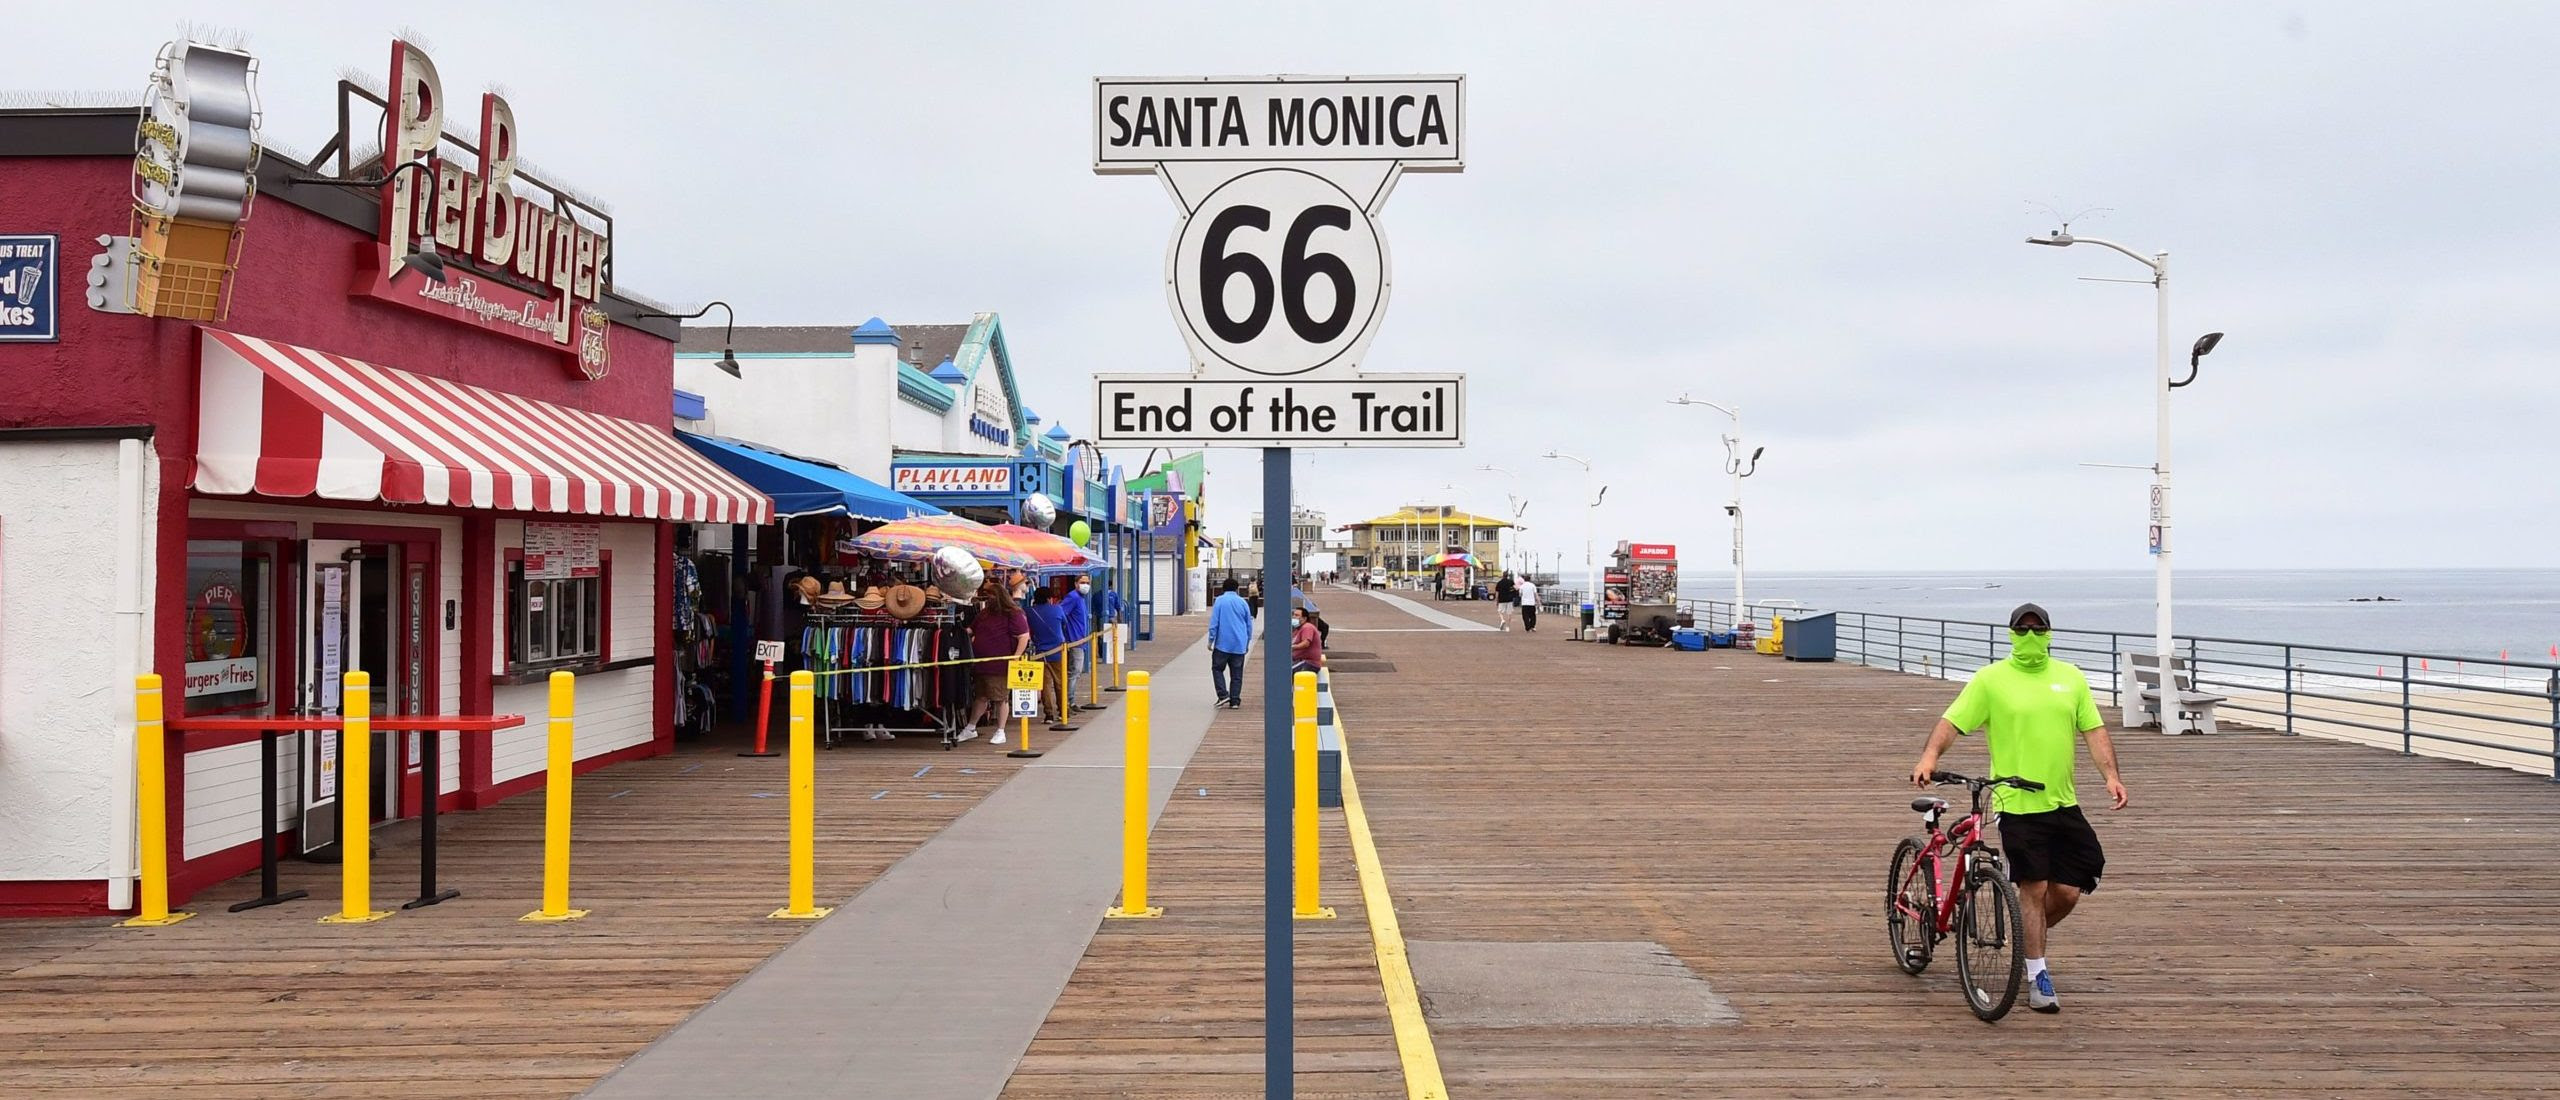 Santa Monica Now One Of The ‘Least Safe’ Cities In California, Survey Says